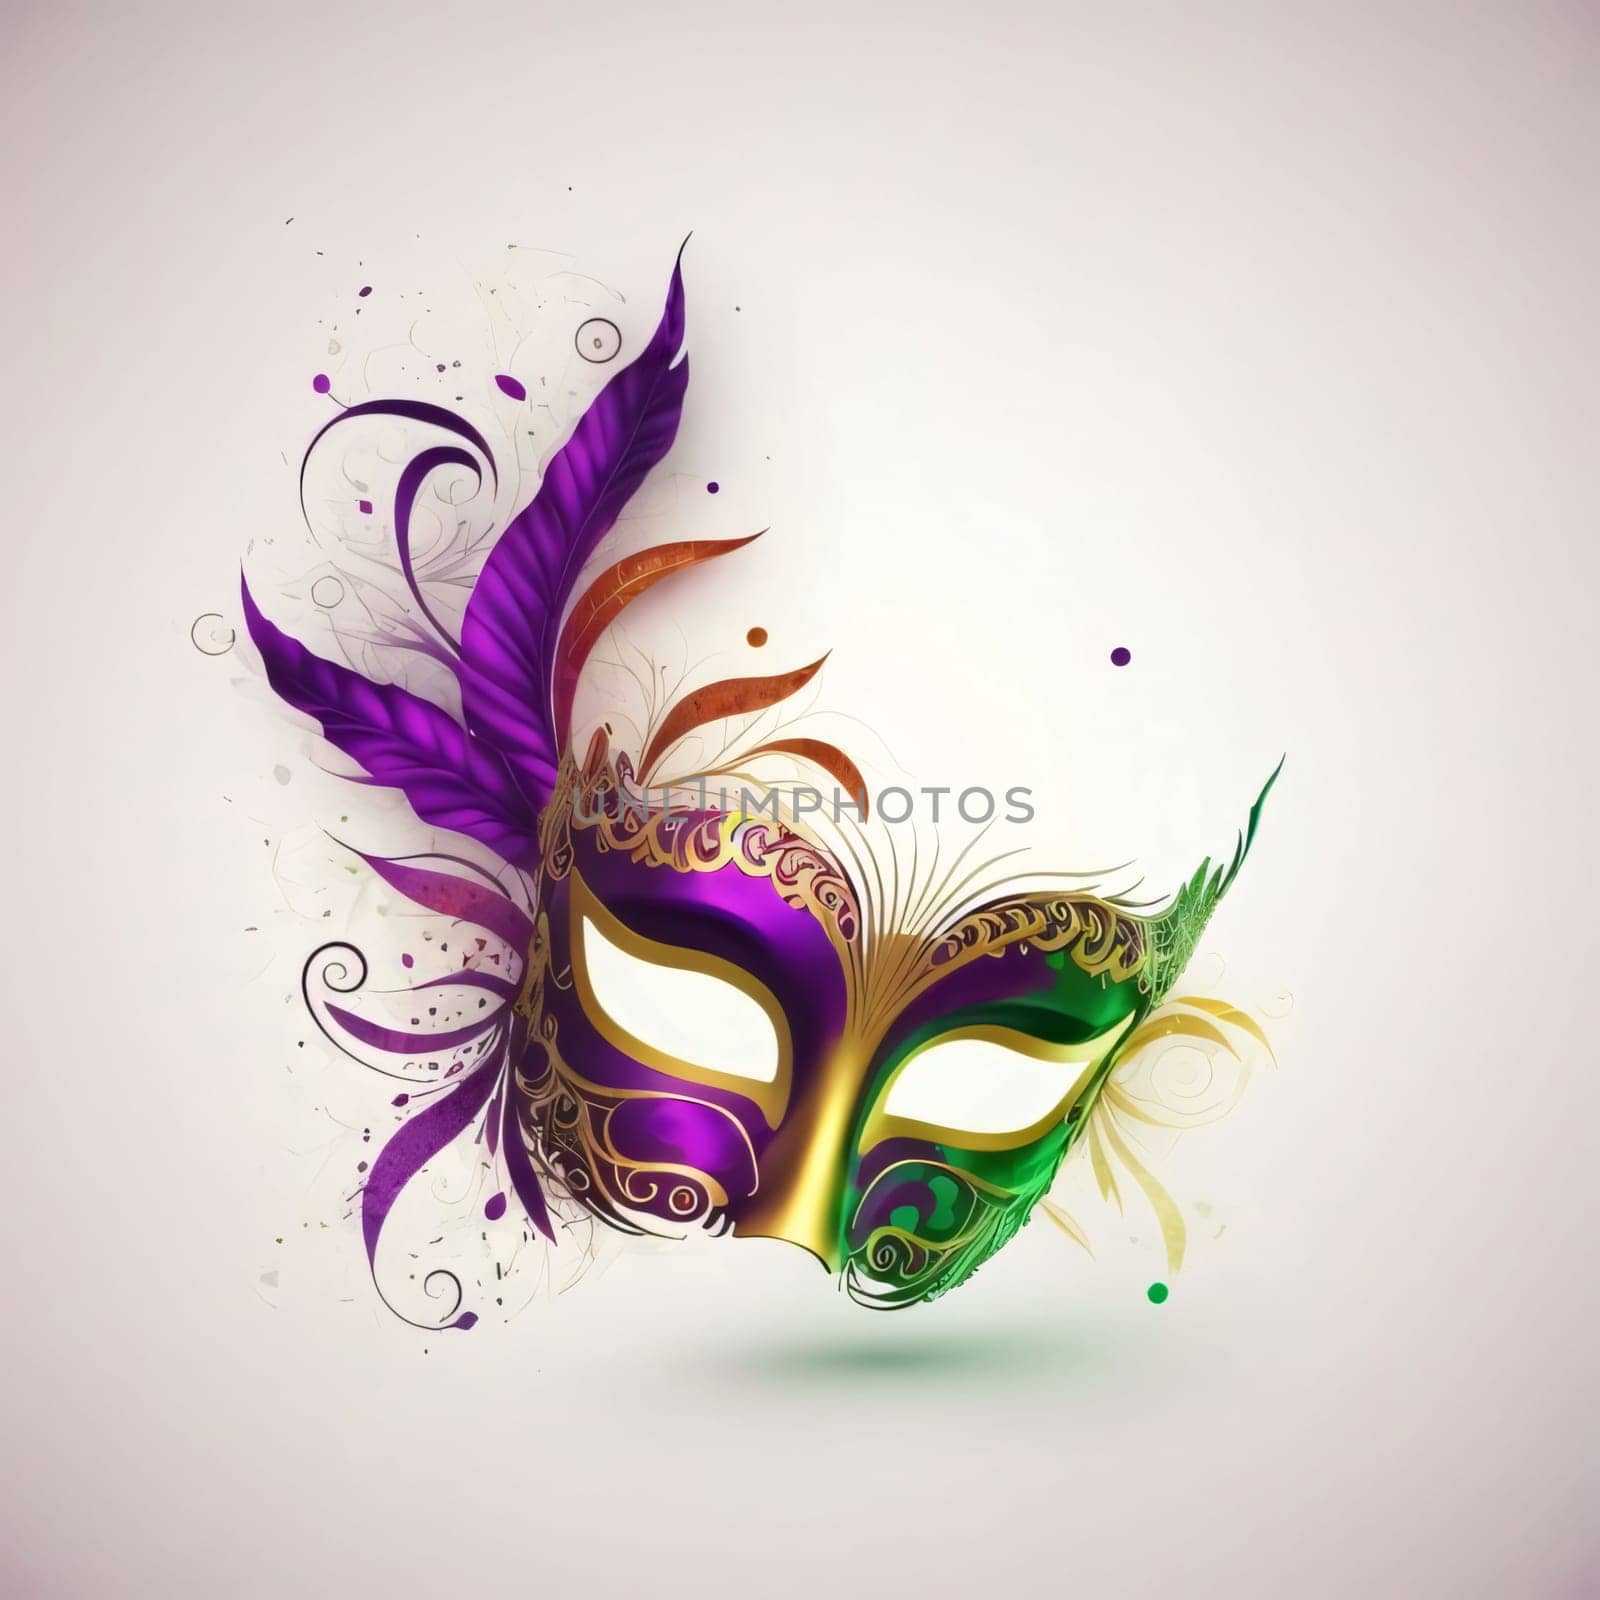 Gold purple eye mask with ornaments and feathers white background. Carnival outfits, masks and decorations. A time of fun and celebration before the fast.